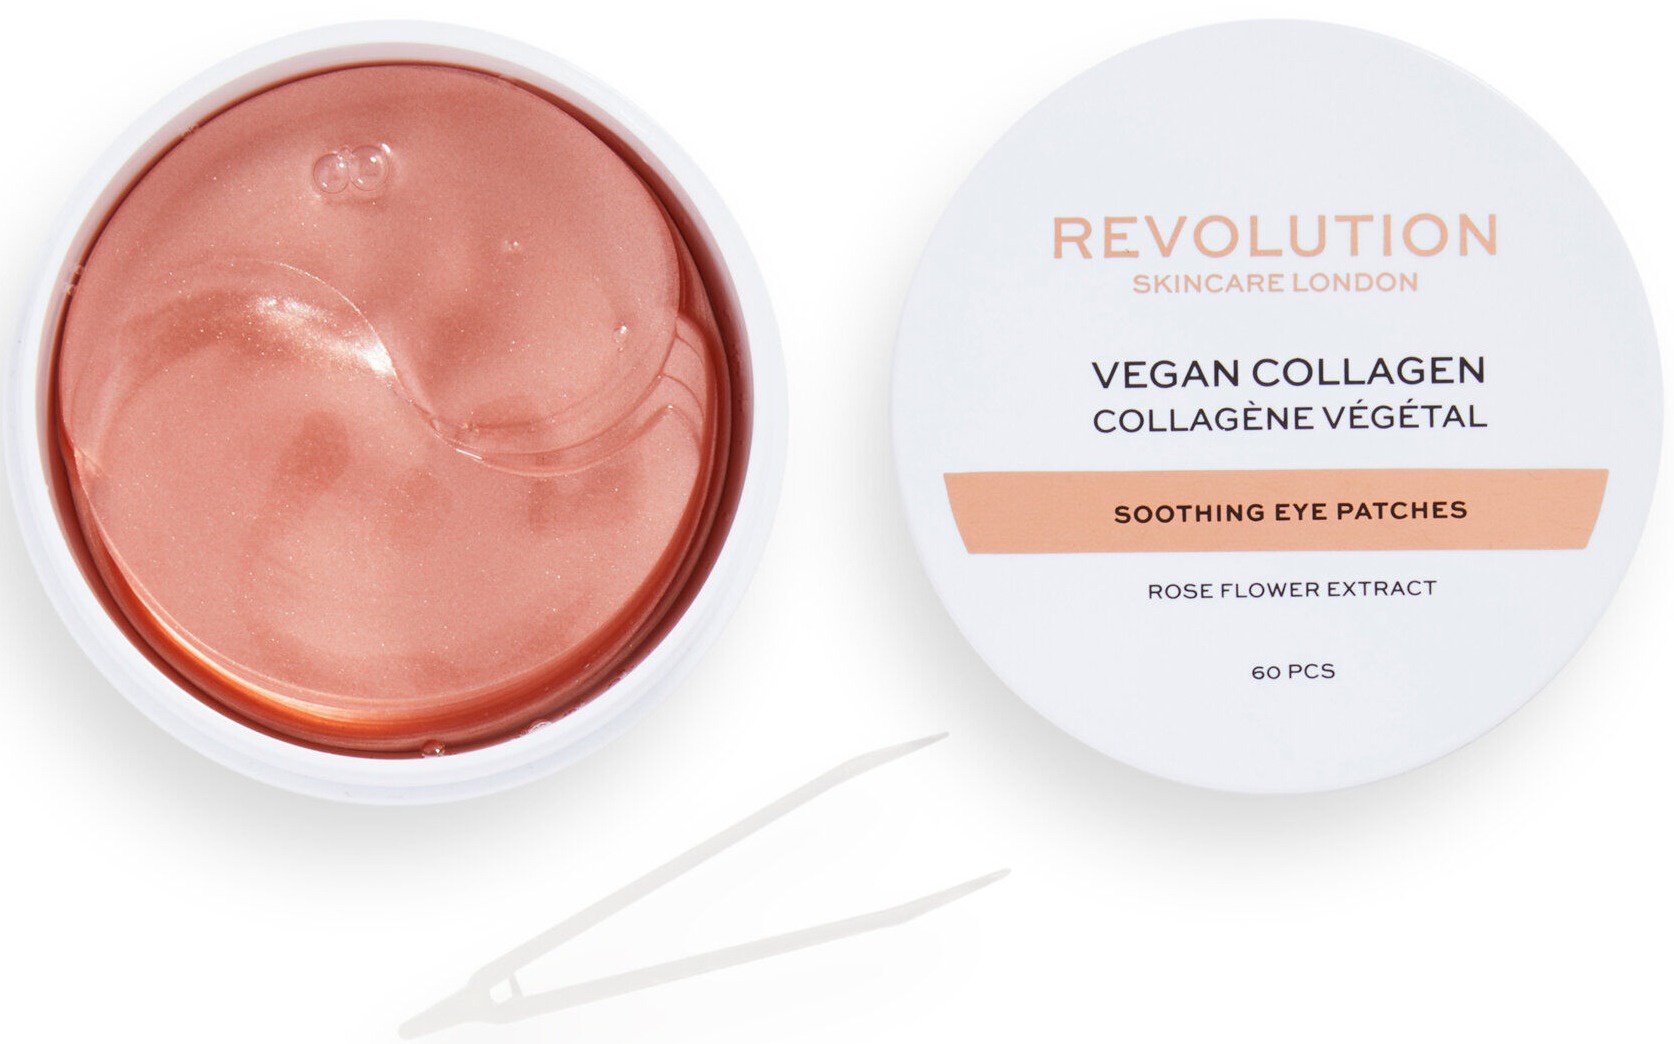 Revolution Skincare Vegan Collagen Soothing Eye Patches